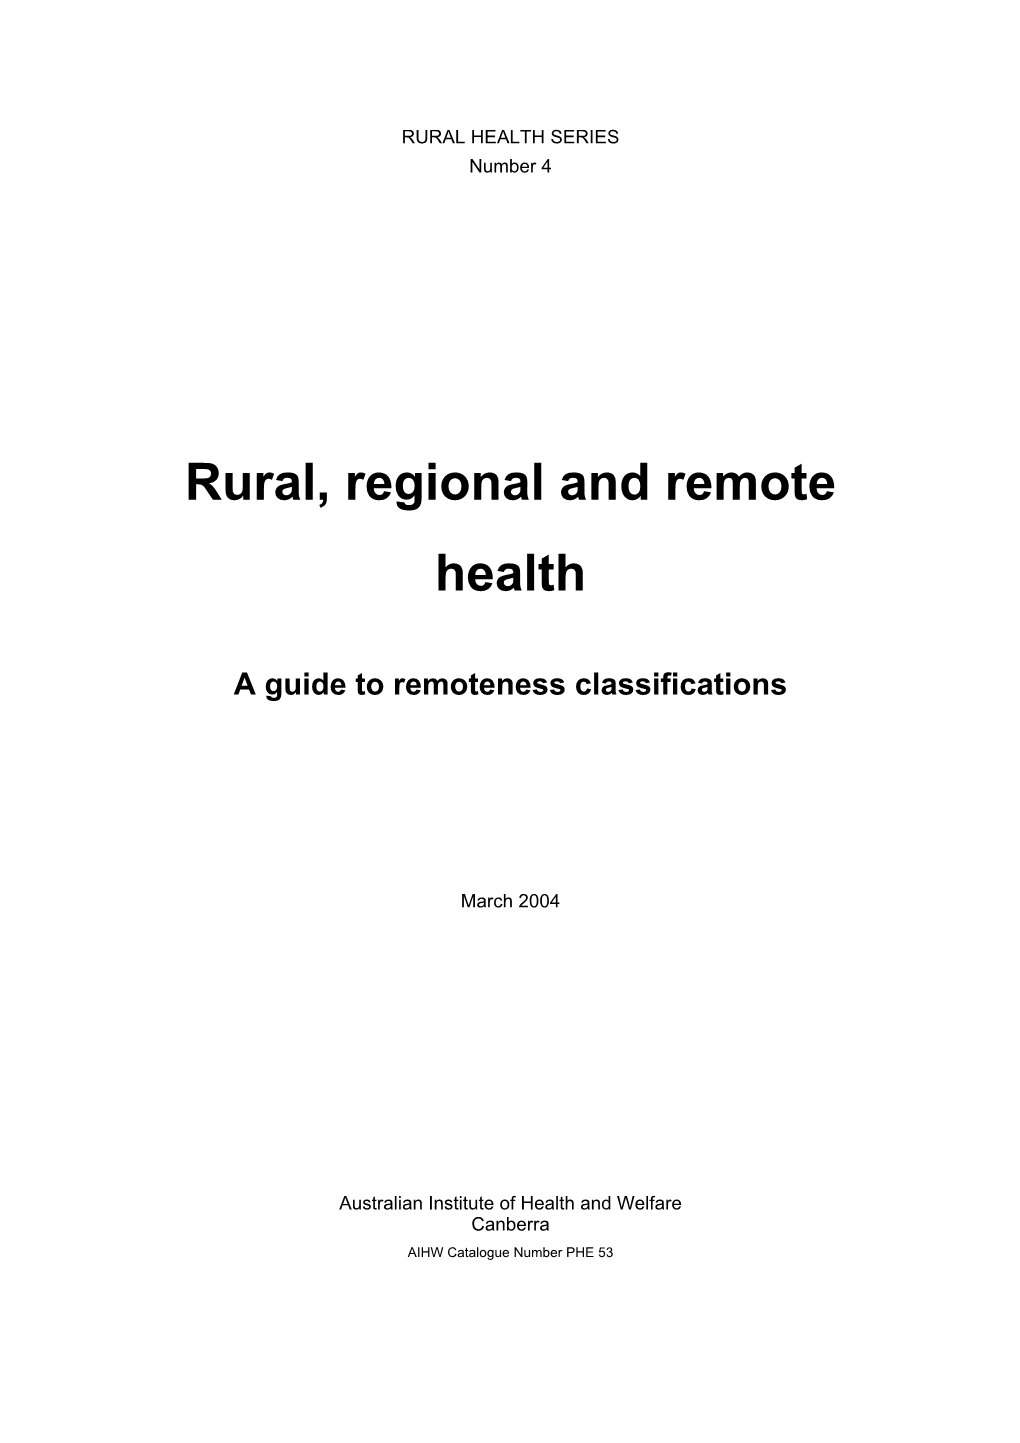 Rural, Regional and Remote Health: a Guide to Remoteness Classifications